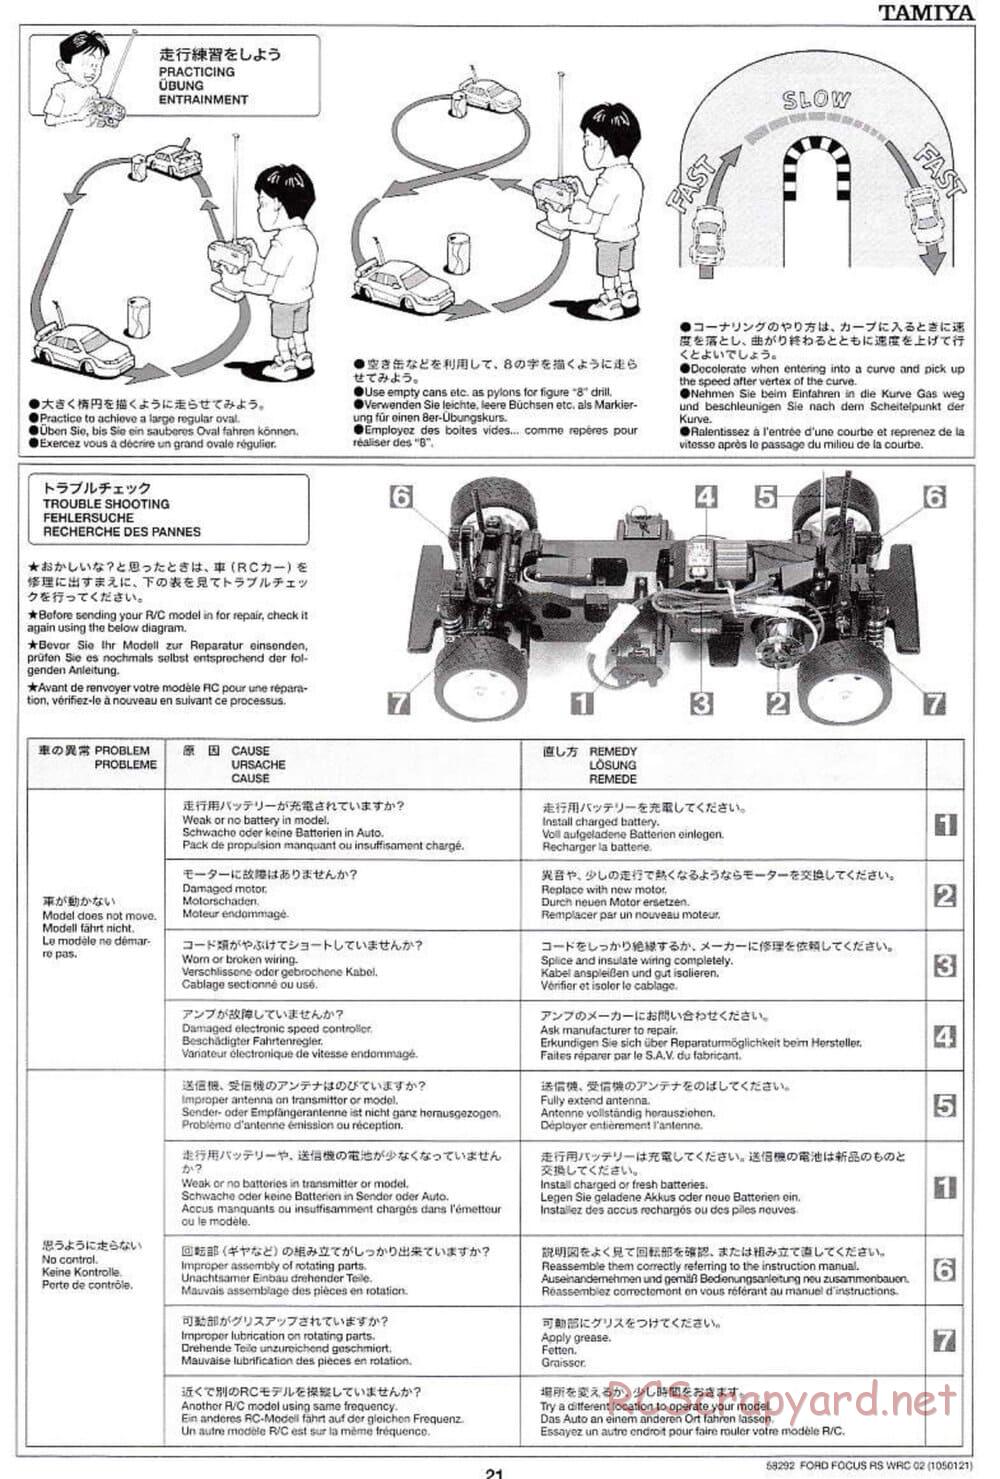 Tamiya - Ford Focus RS WRC 02 - TL-01 Chassis - Manual - Page 21